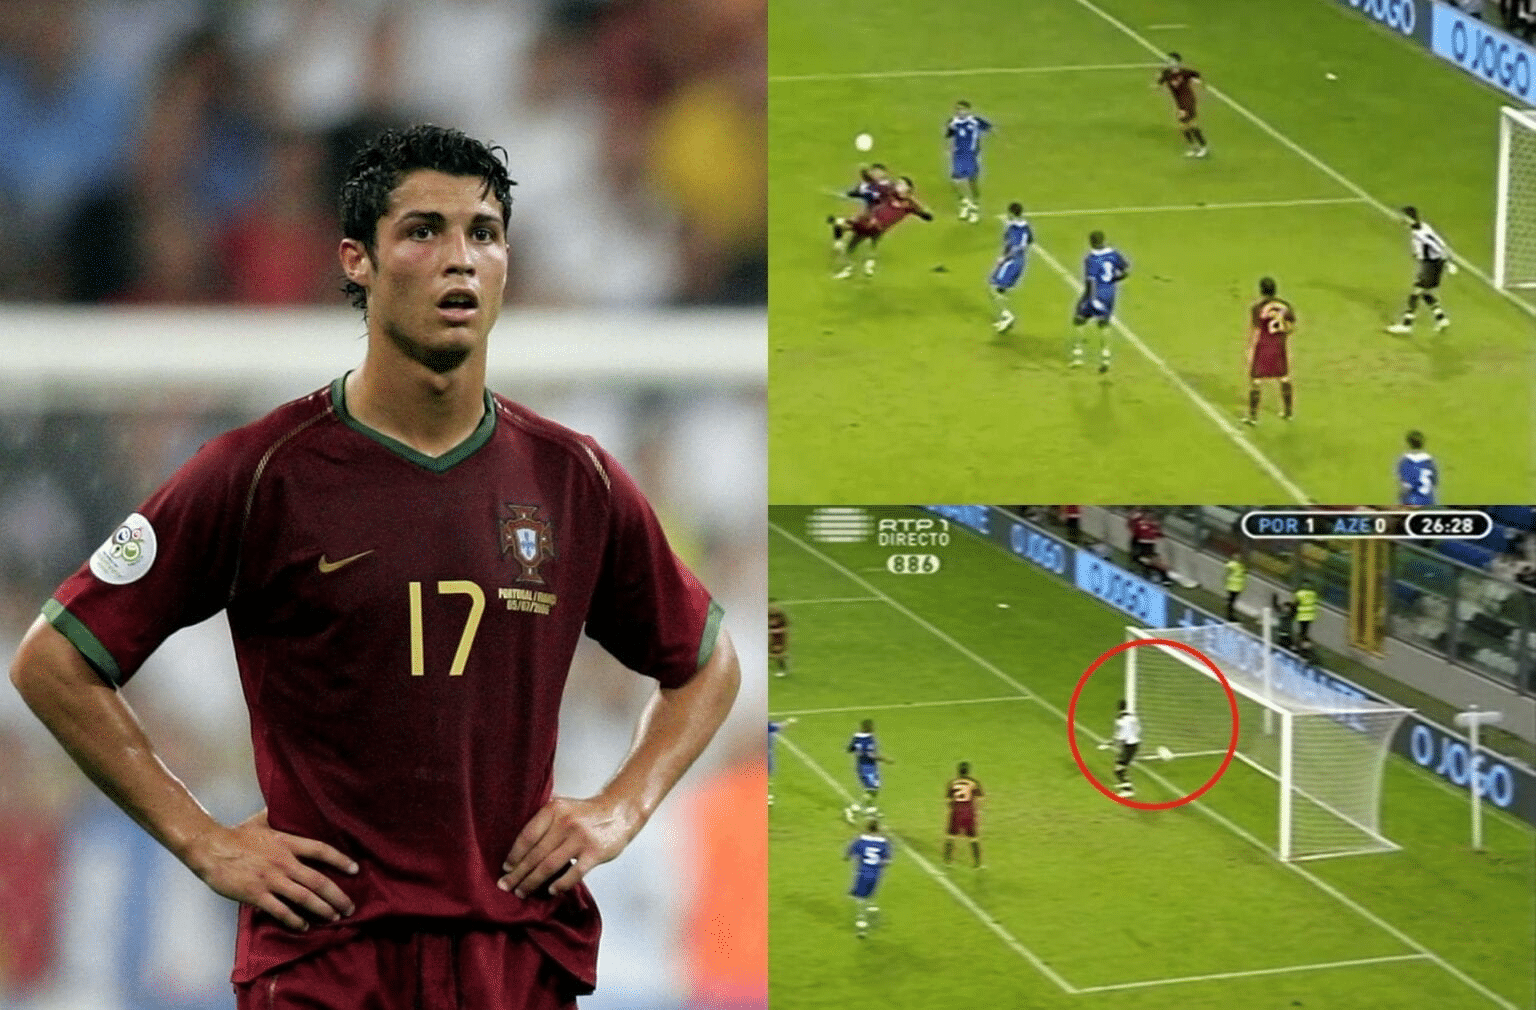 TB VIDEO: When Ronaldo's Incredible Goal For Portugal Was Disallowed In 2006